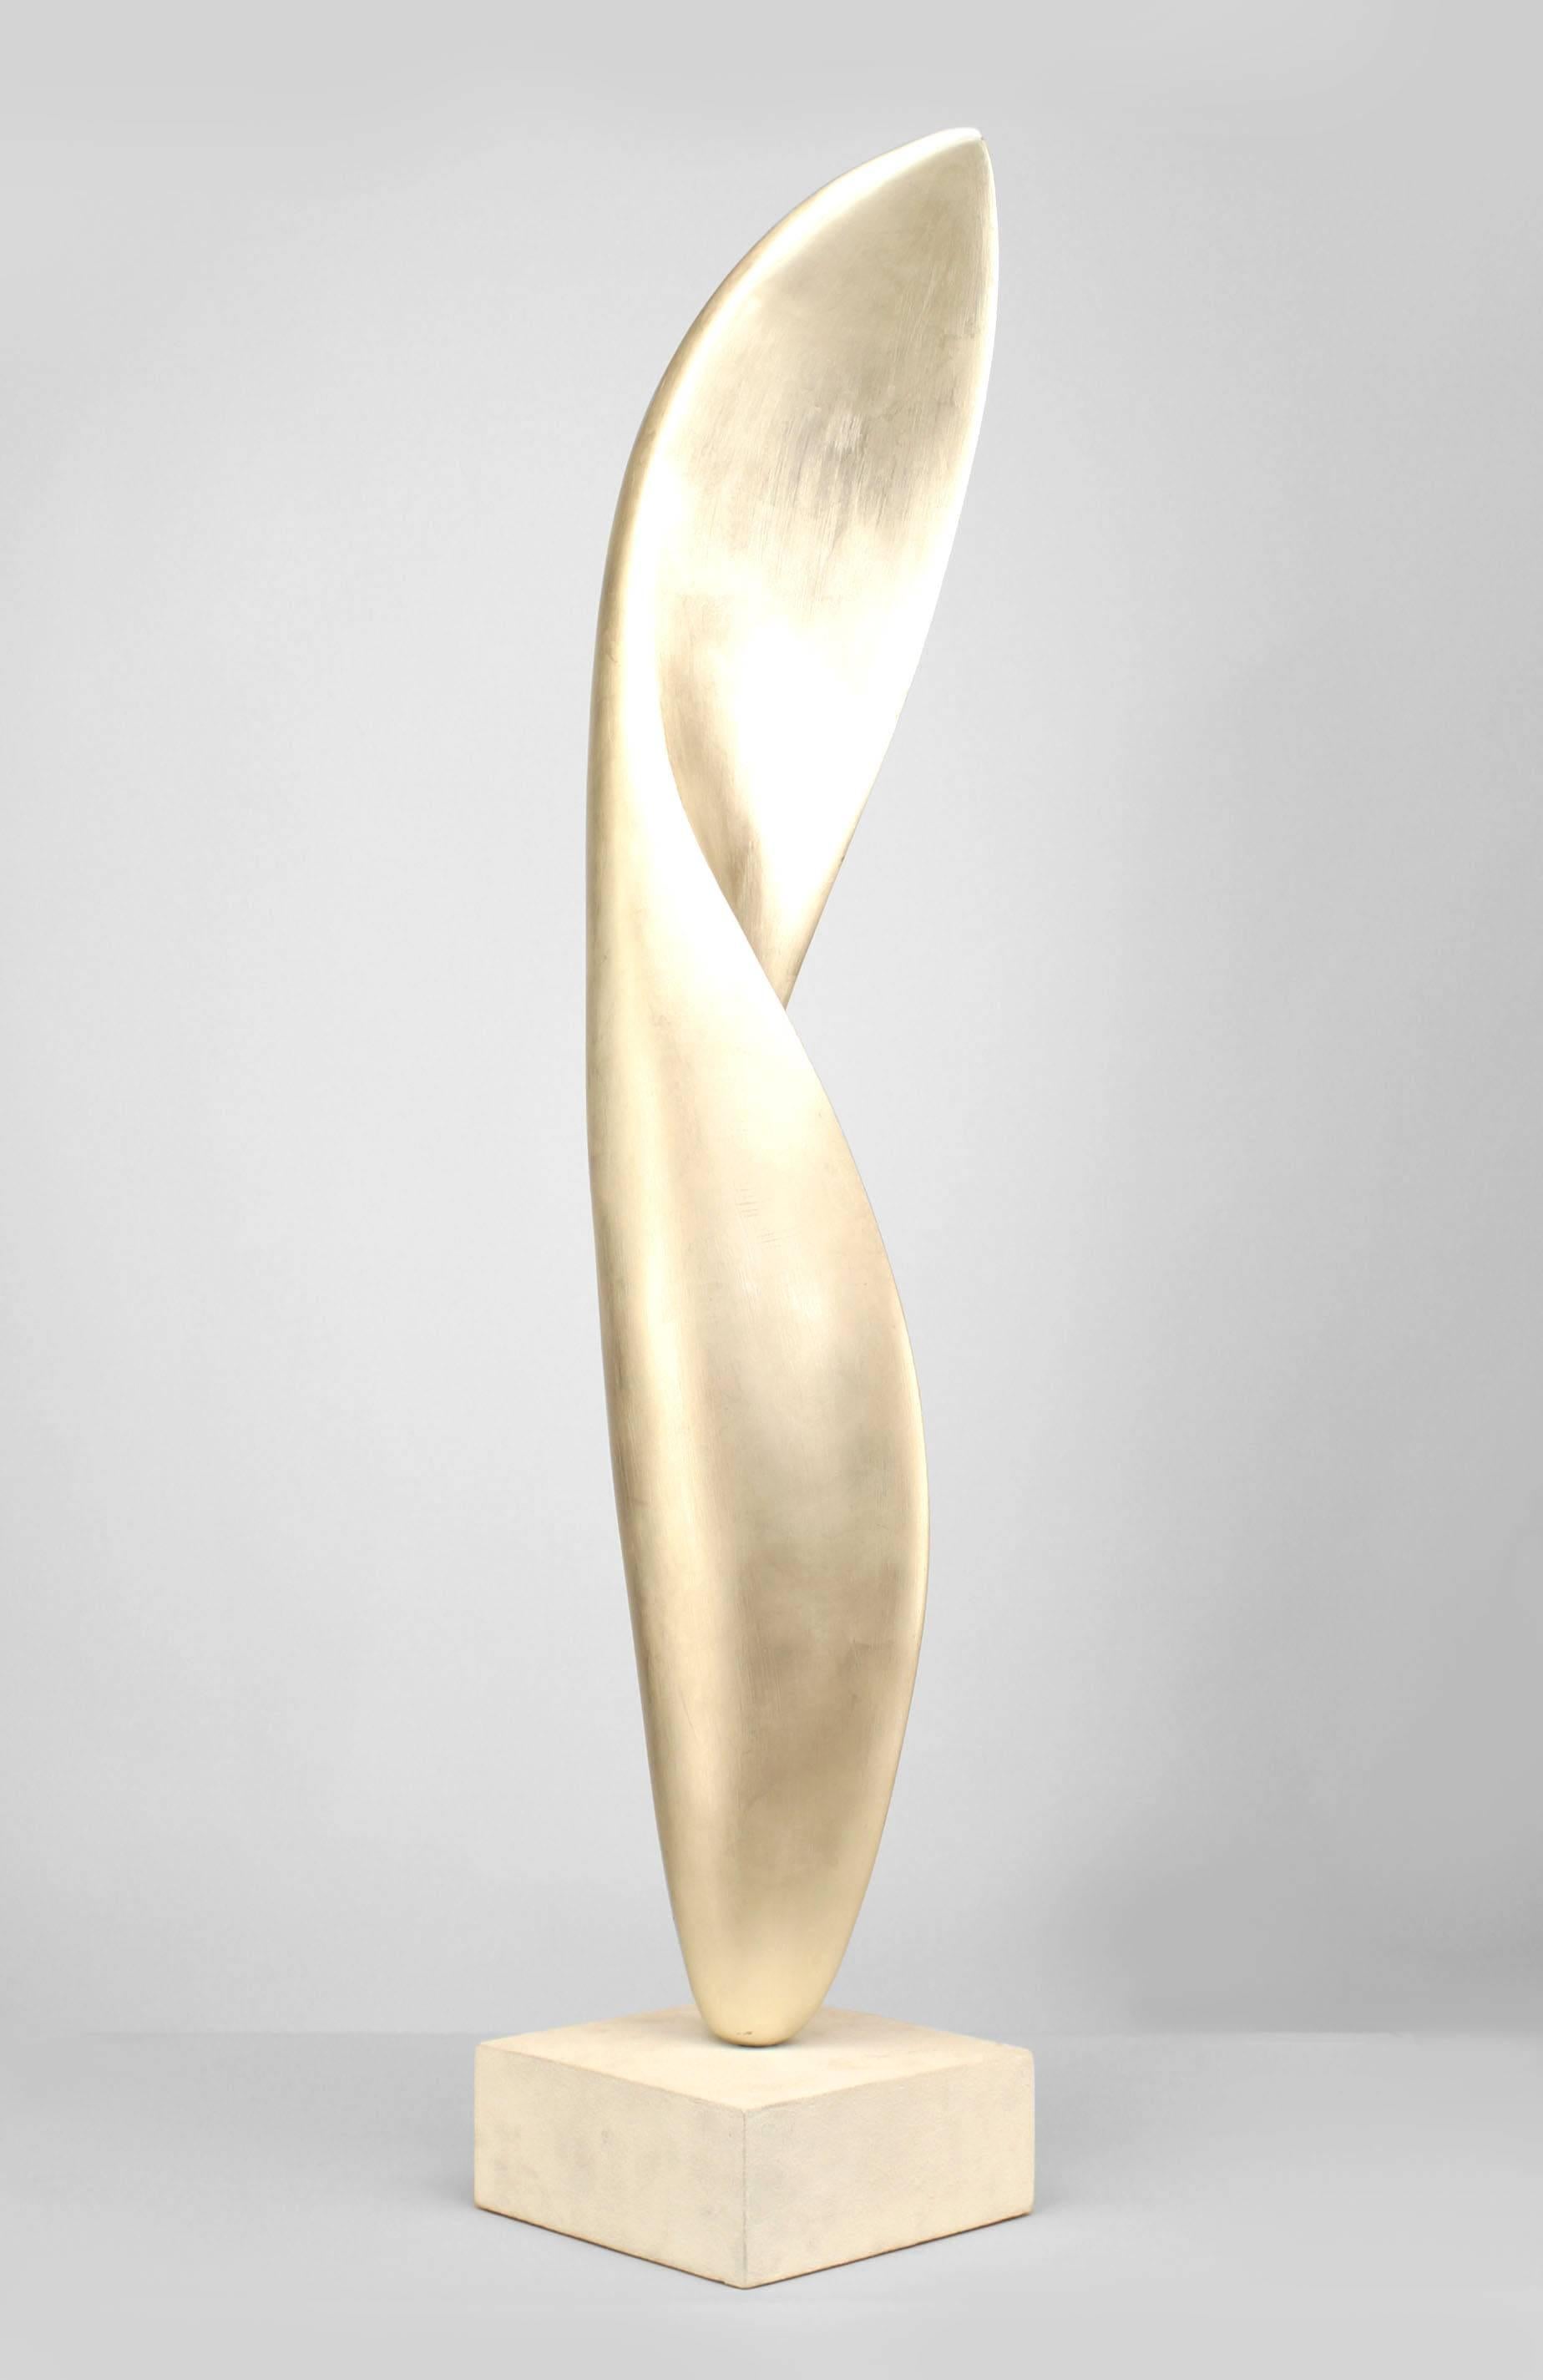 American Post-War Design silver leaf over resin sculpture of a vertical form mounted on a square base (Kevin Kelly)
